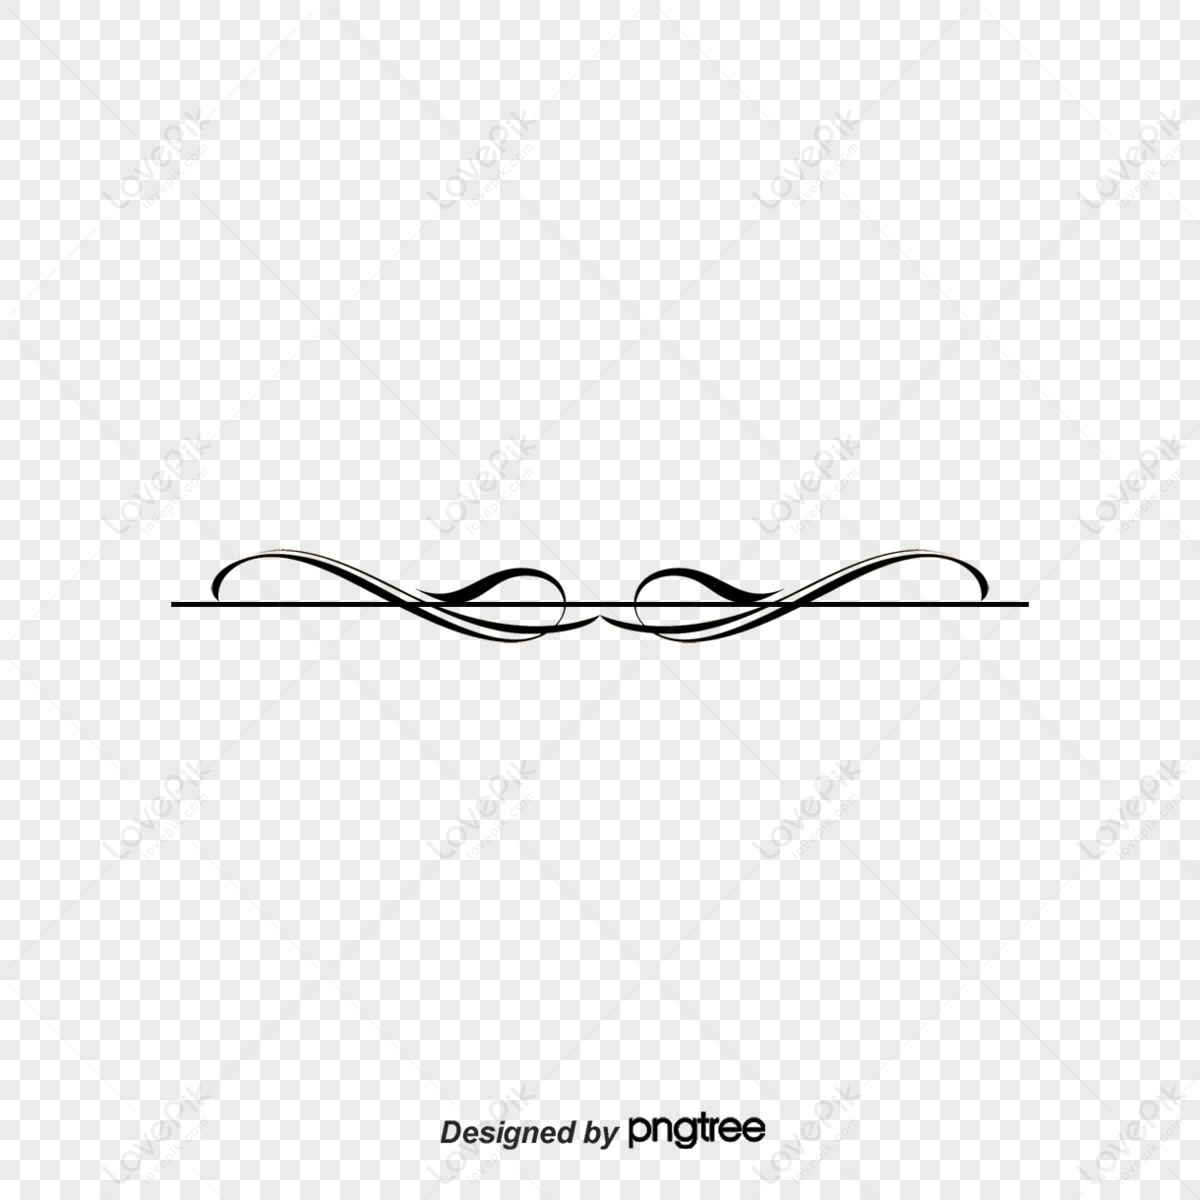 Dividers Free Vector PNG Images With Transparent Background | Free ...